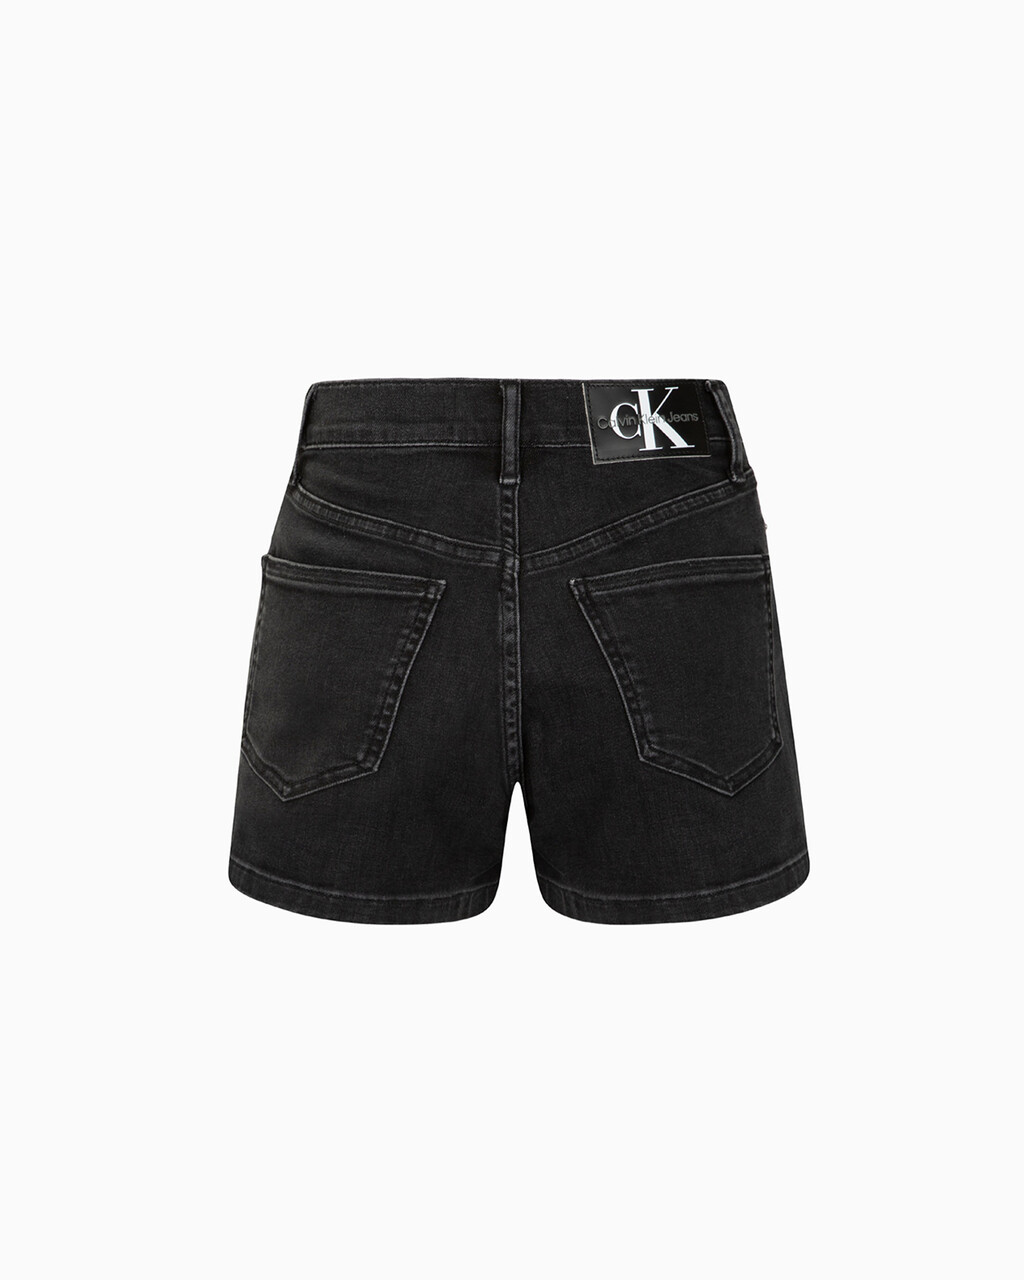 37.5 RECYCLED COTTON HIGH RISE DENIM SHORTS, Washed Black Dbl Belted Wb, hi-res